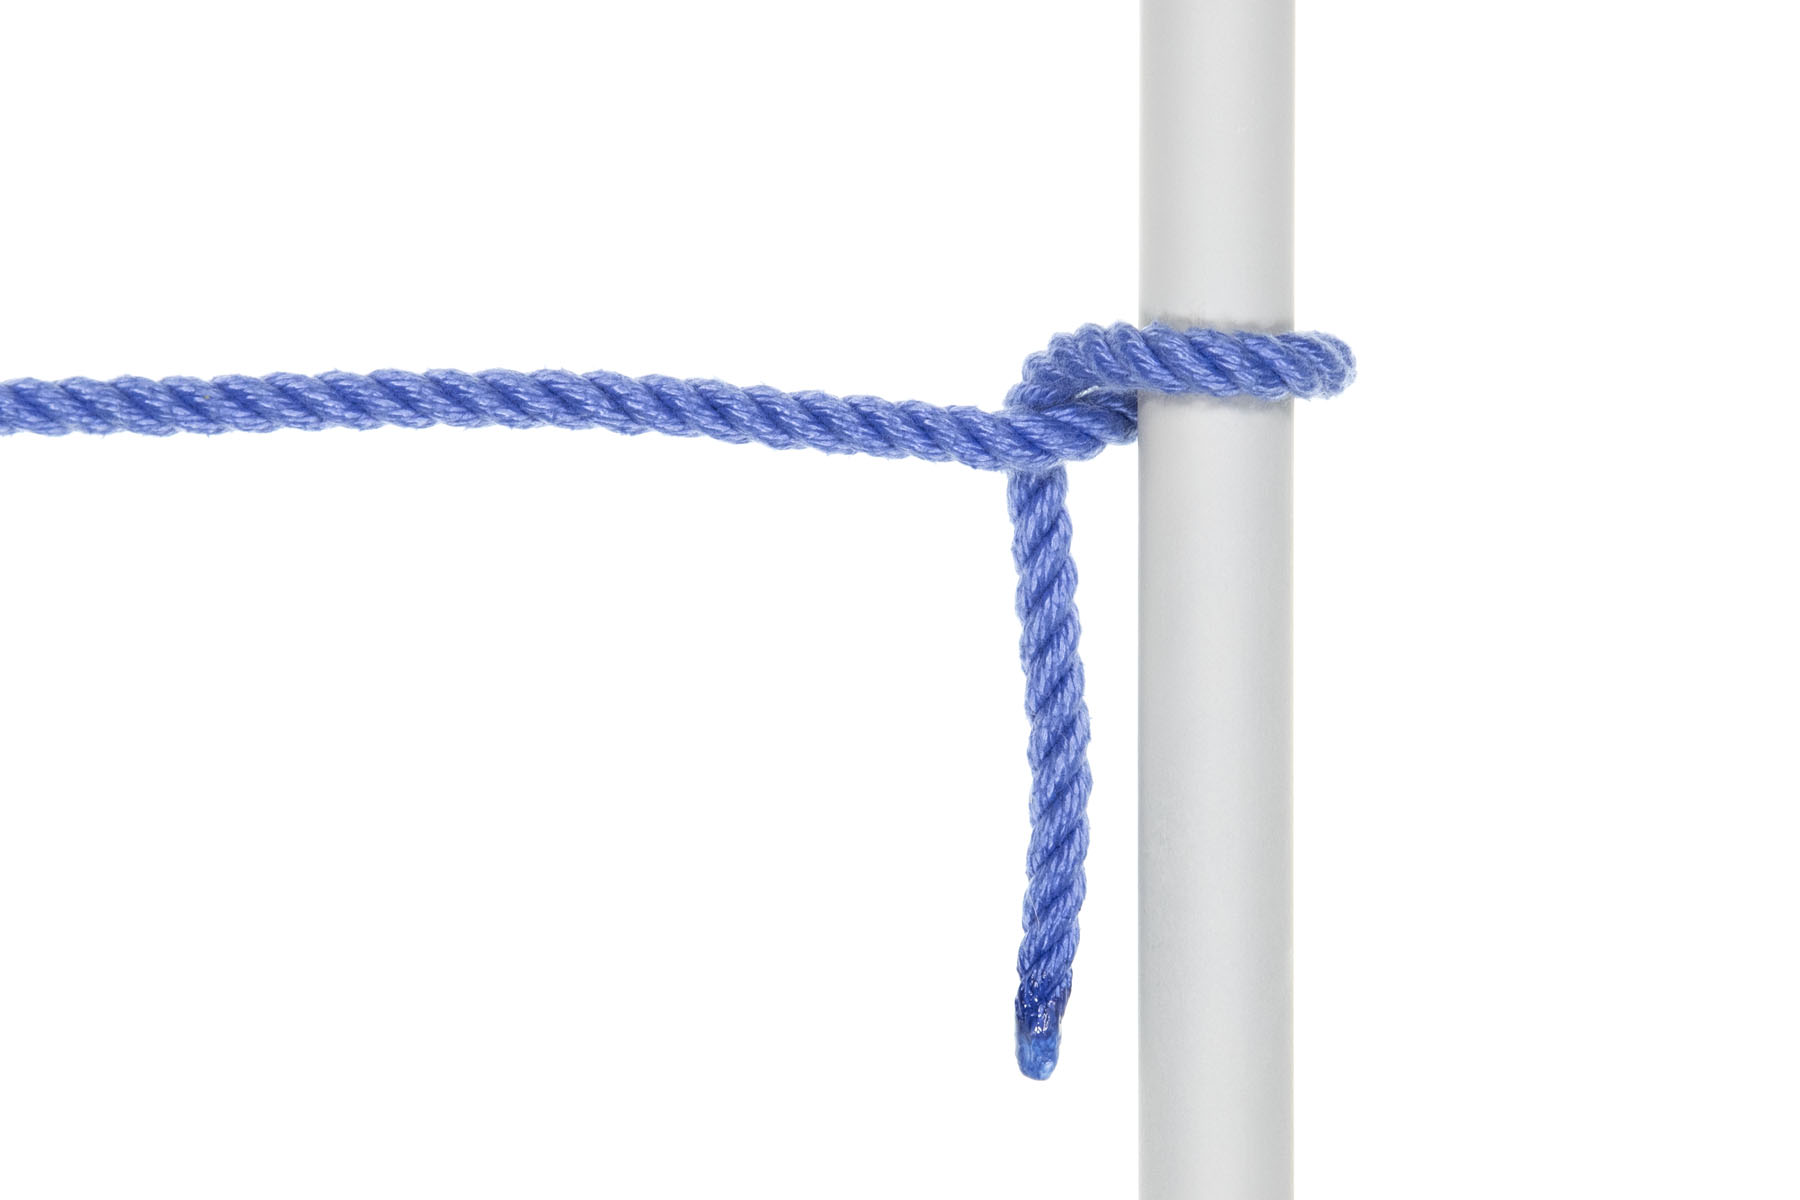 A one inch vertical gray pole divides the image in half. A single strand of blue rope enters from the left and makes a 180 degree turn around the pole, going under it and then doubling back on top of it. The working end comes off the pole slightly higher in the image than the standing part, passes behind the standing part, and travels straight down in the image.